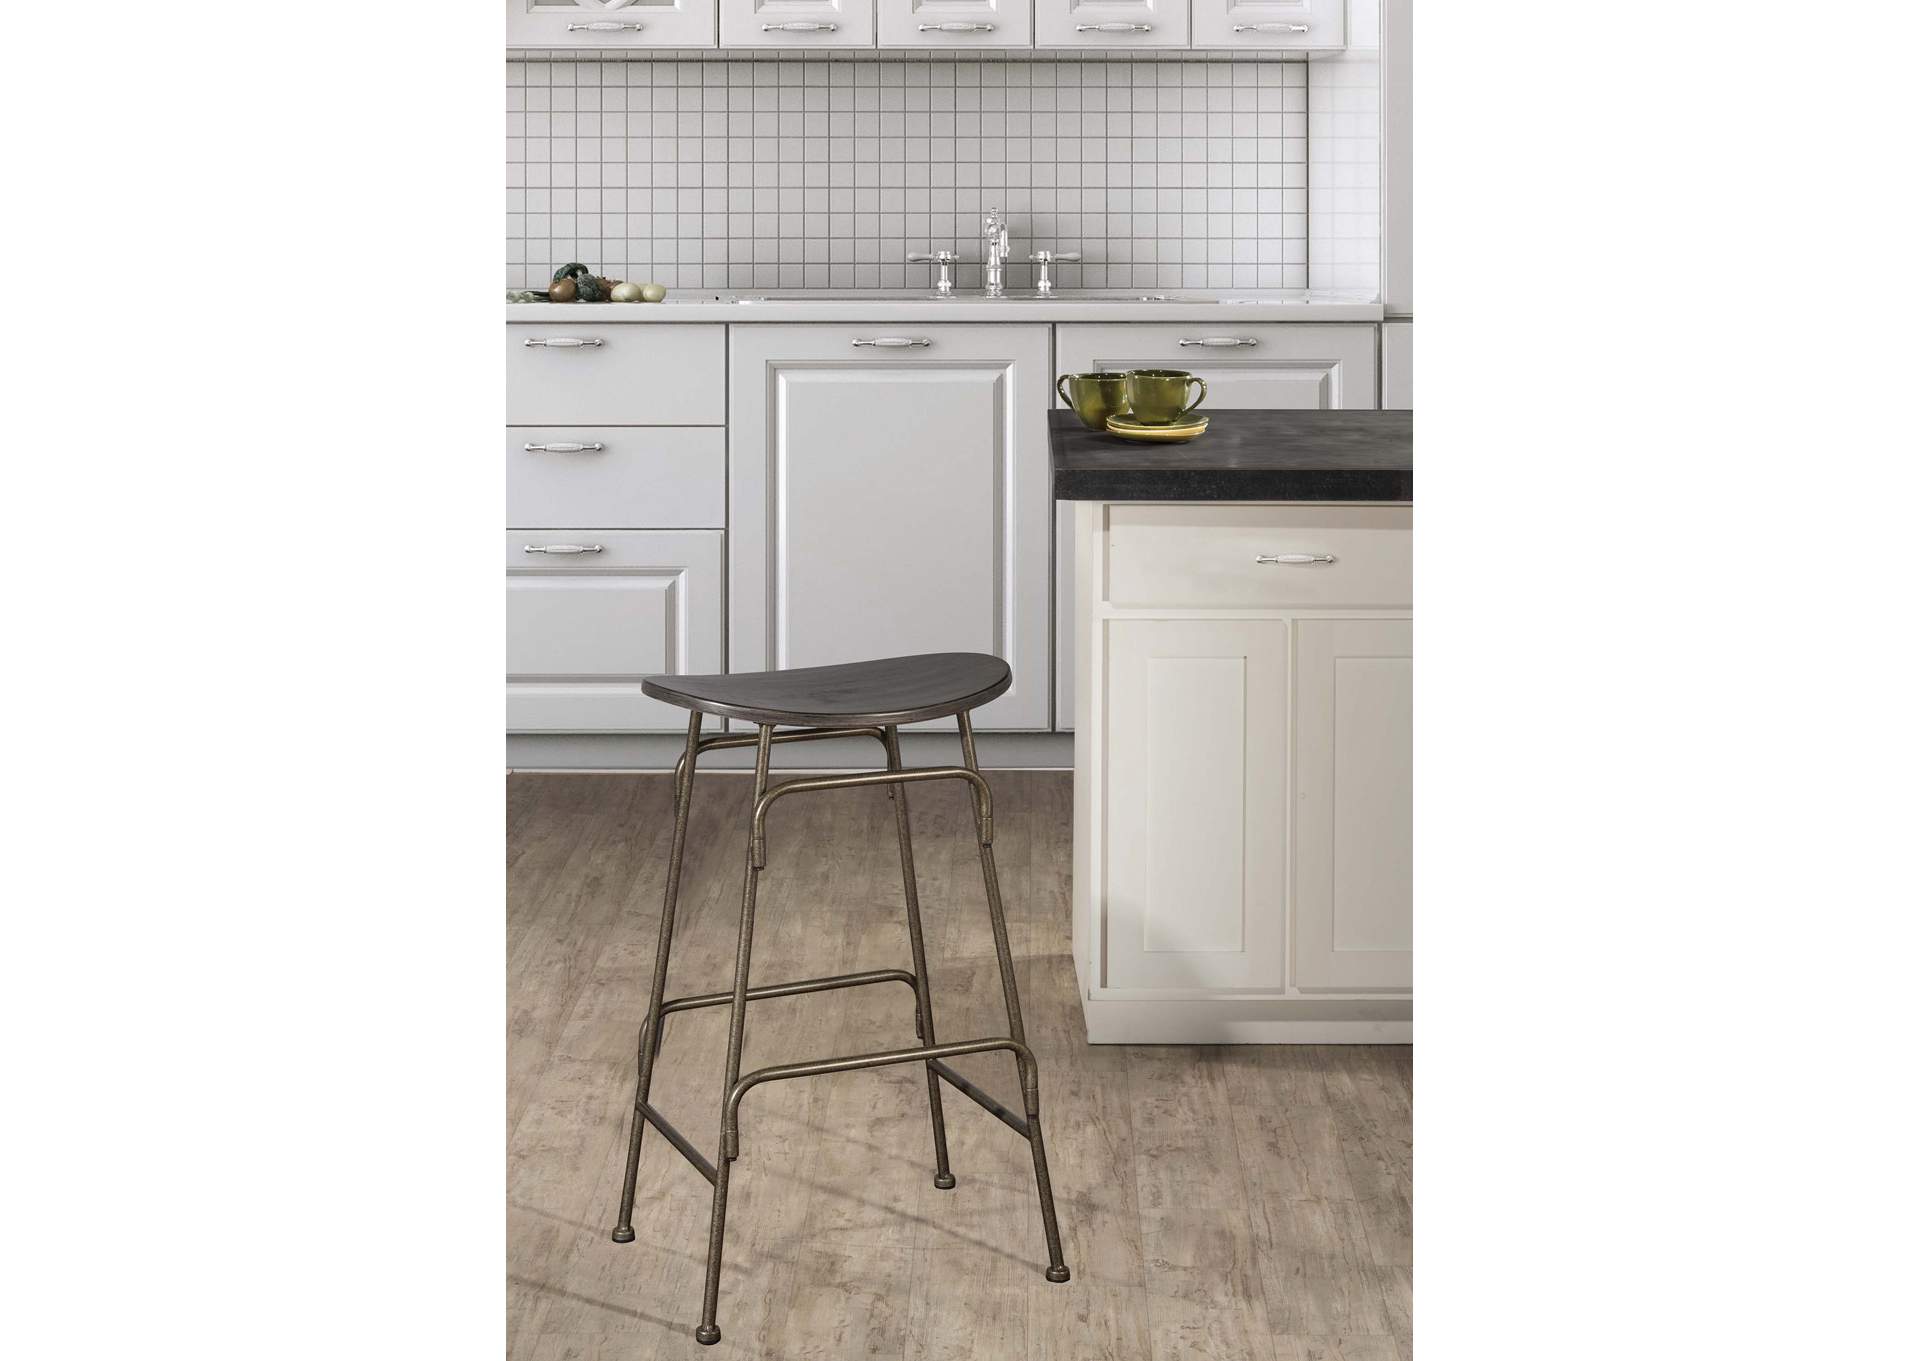 Mitchell Backless Bar Stool,Hillsdale